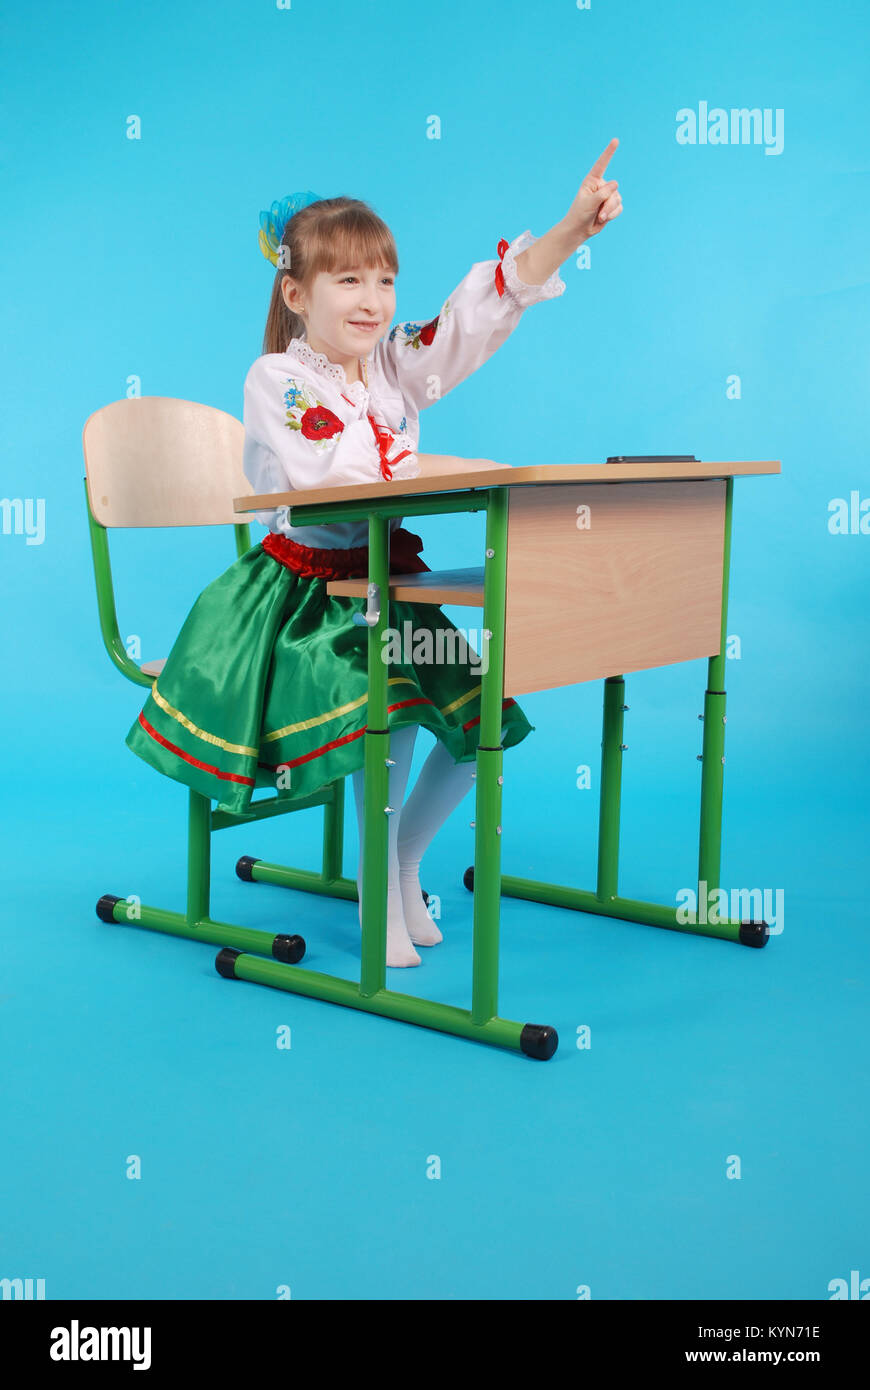 Young girl with light hair in Ukrainian embroidery sitting on school desk isolated on blue backround Stock Photo